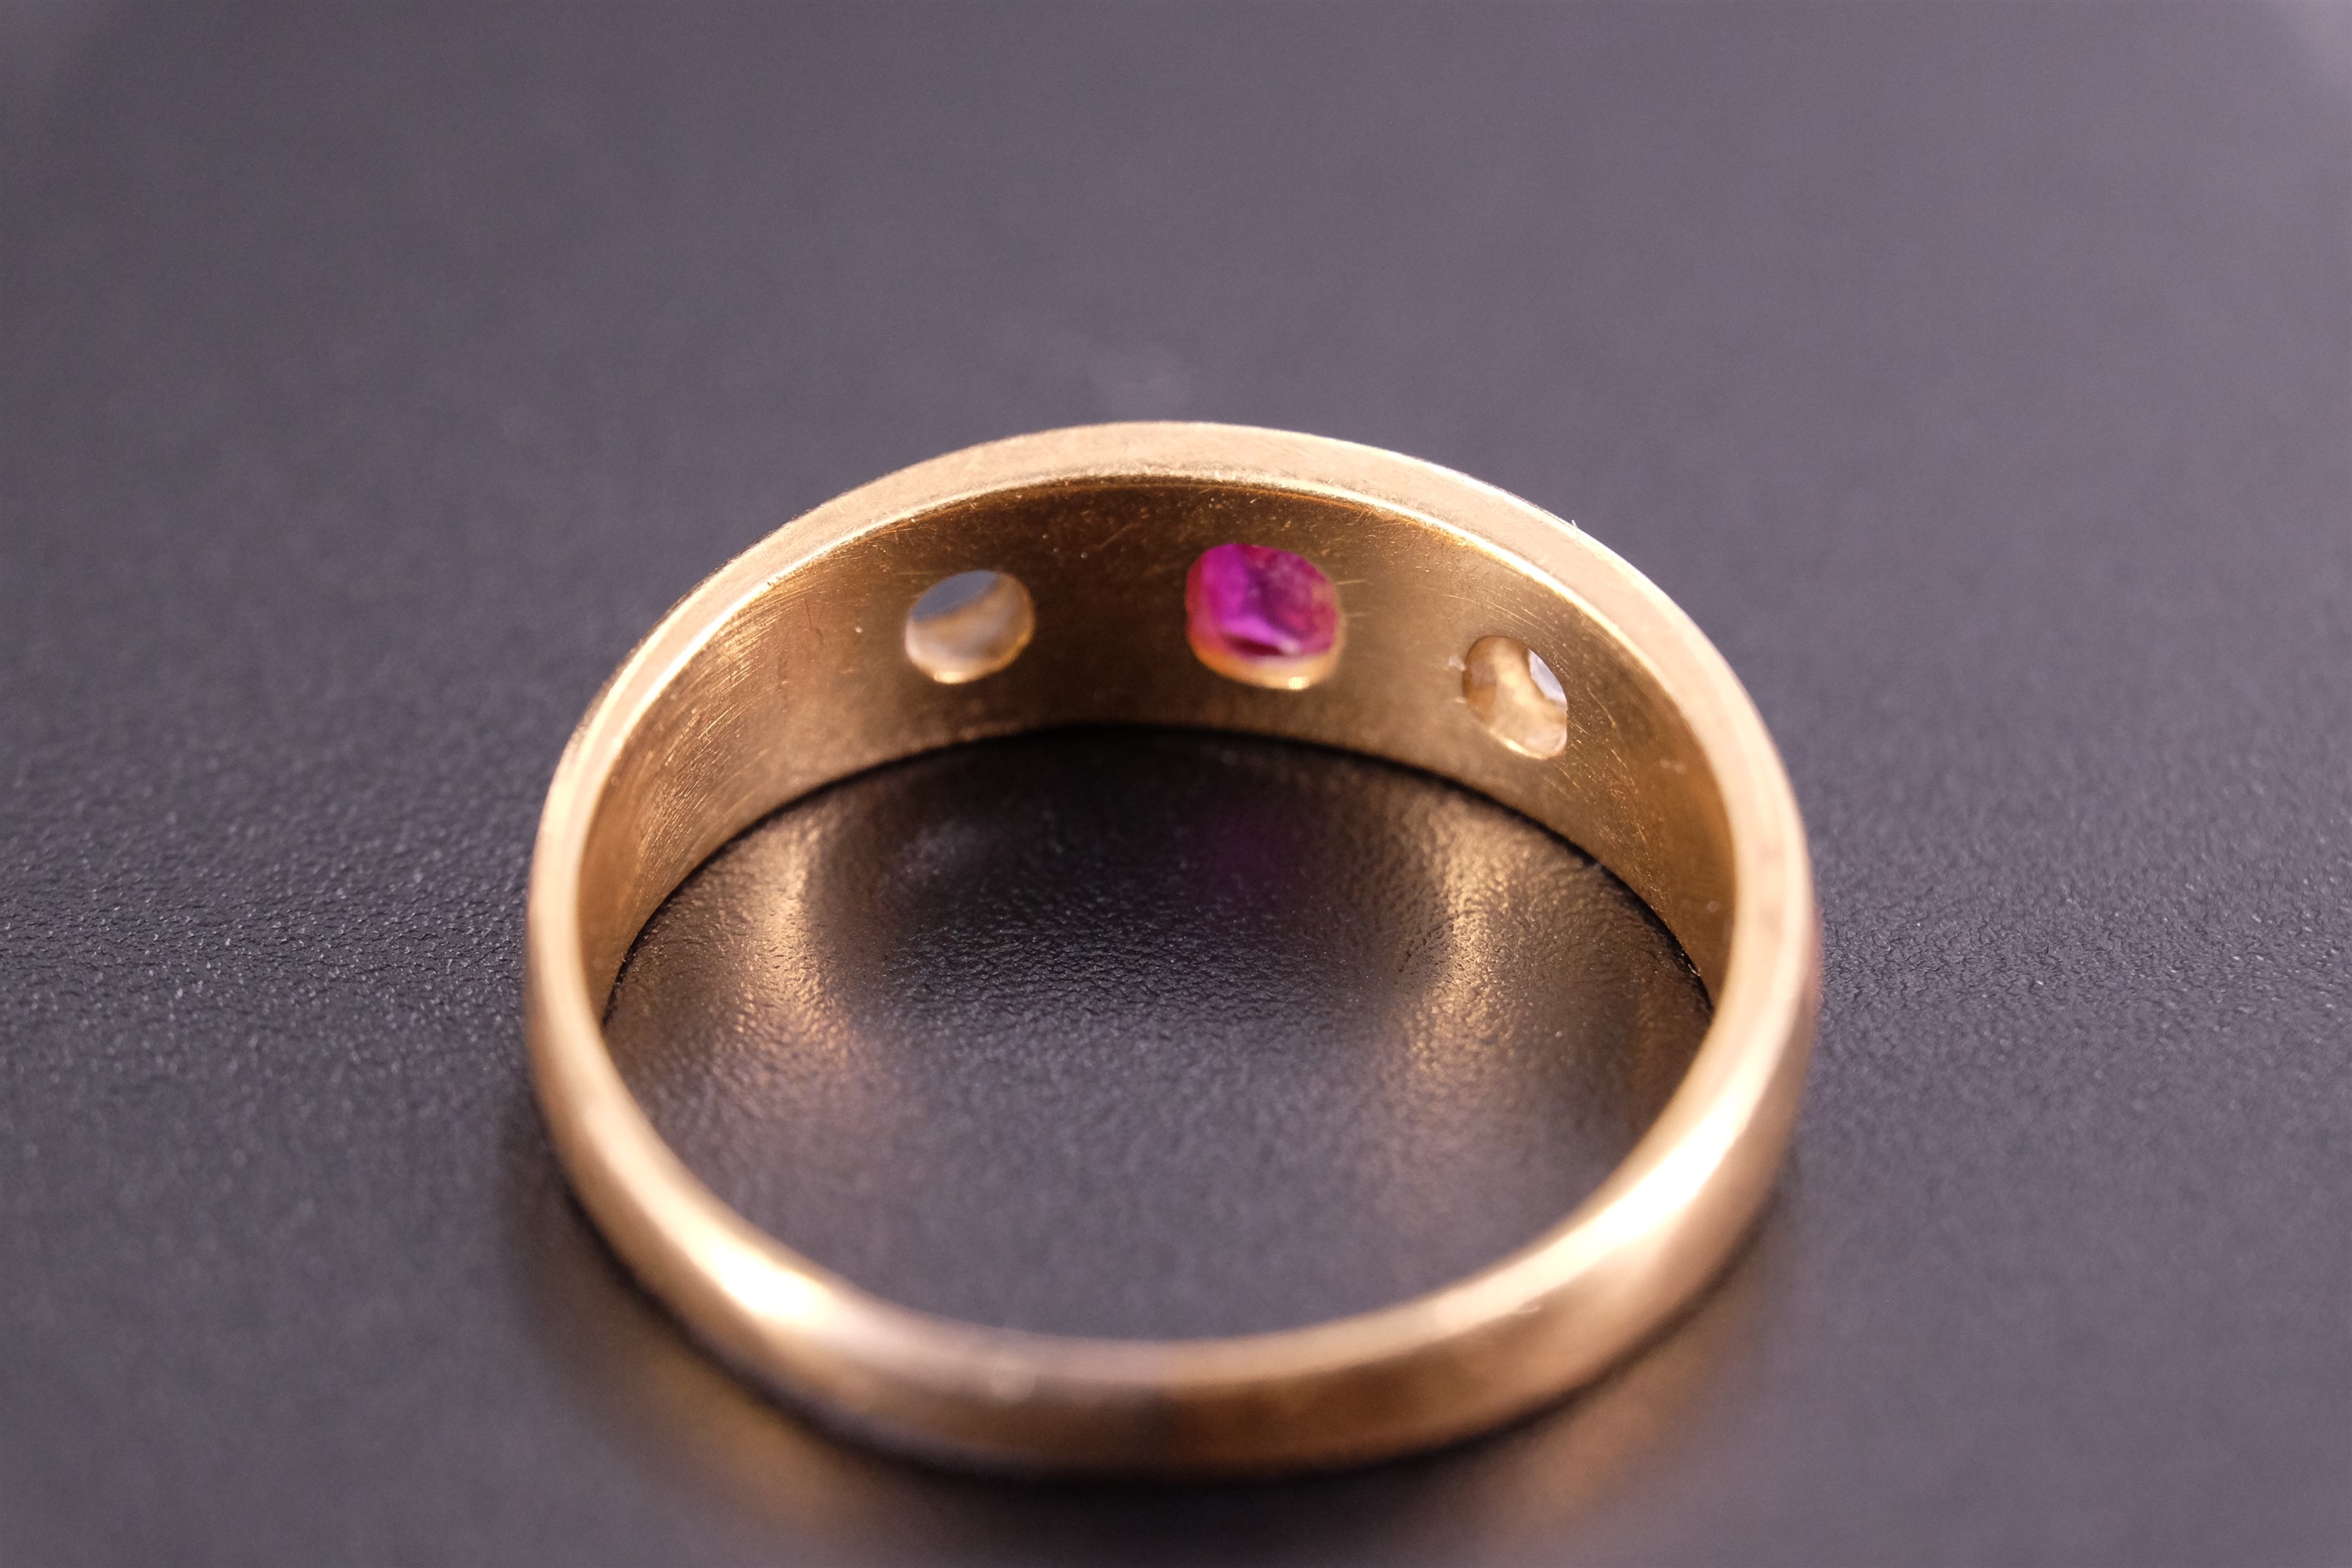 An 18 ct yellow metal, diamond and pink stone finger ring, the stones sunken set on a broad tapering - Image 3 of 4